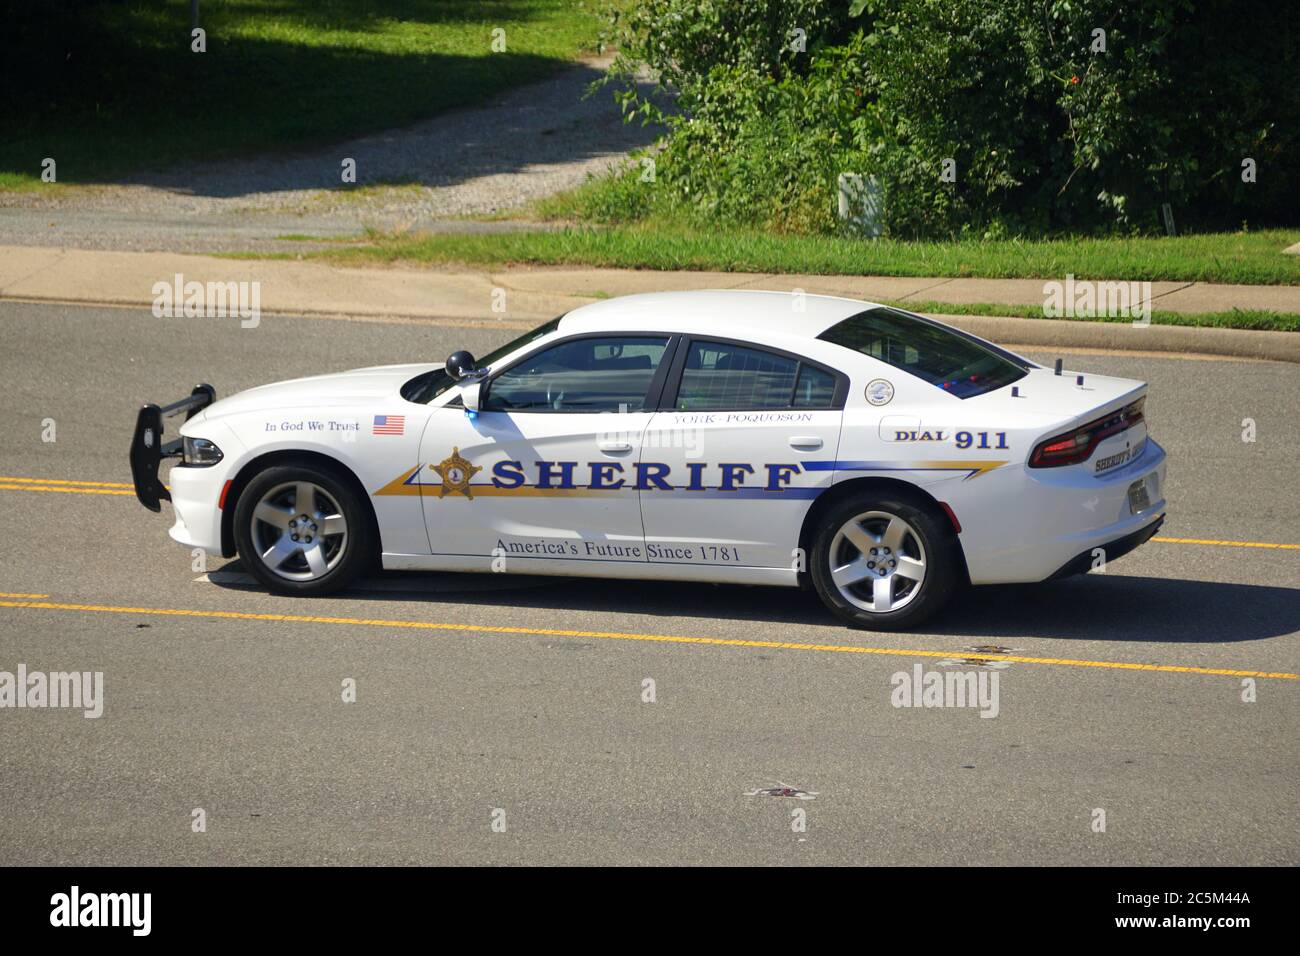 Jamestown, Virginia, U.S.A - June 29, 2020 - A police car stopped in the middle of the road to patrol the street Stock Photo